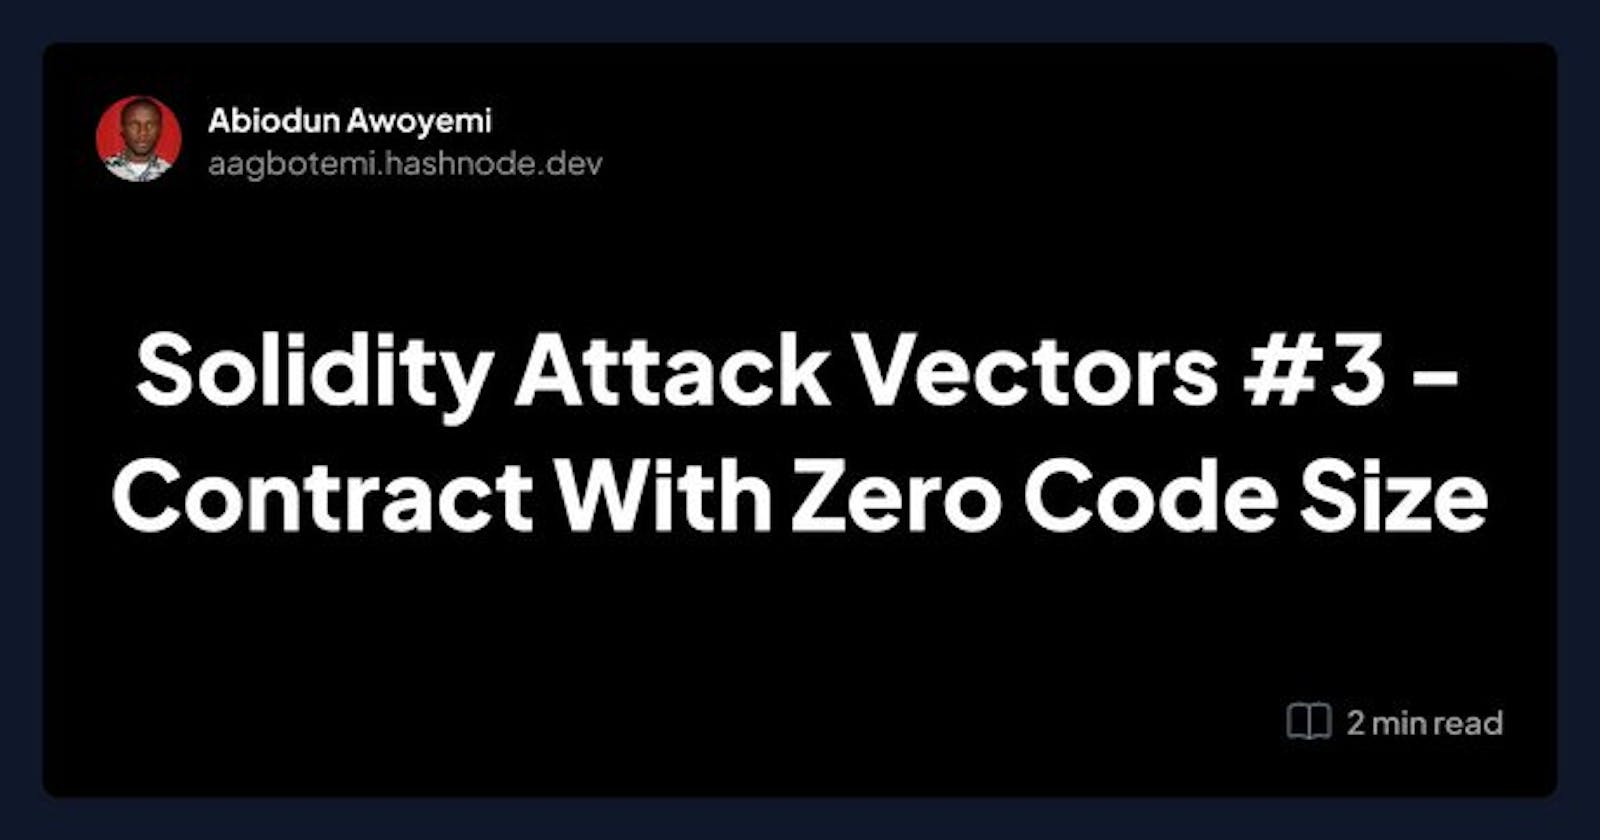 Solidity Attack Vectors #3 - Contract With Zero Code Size